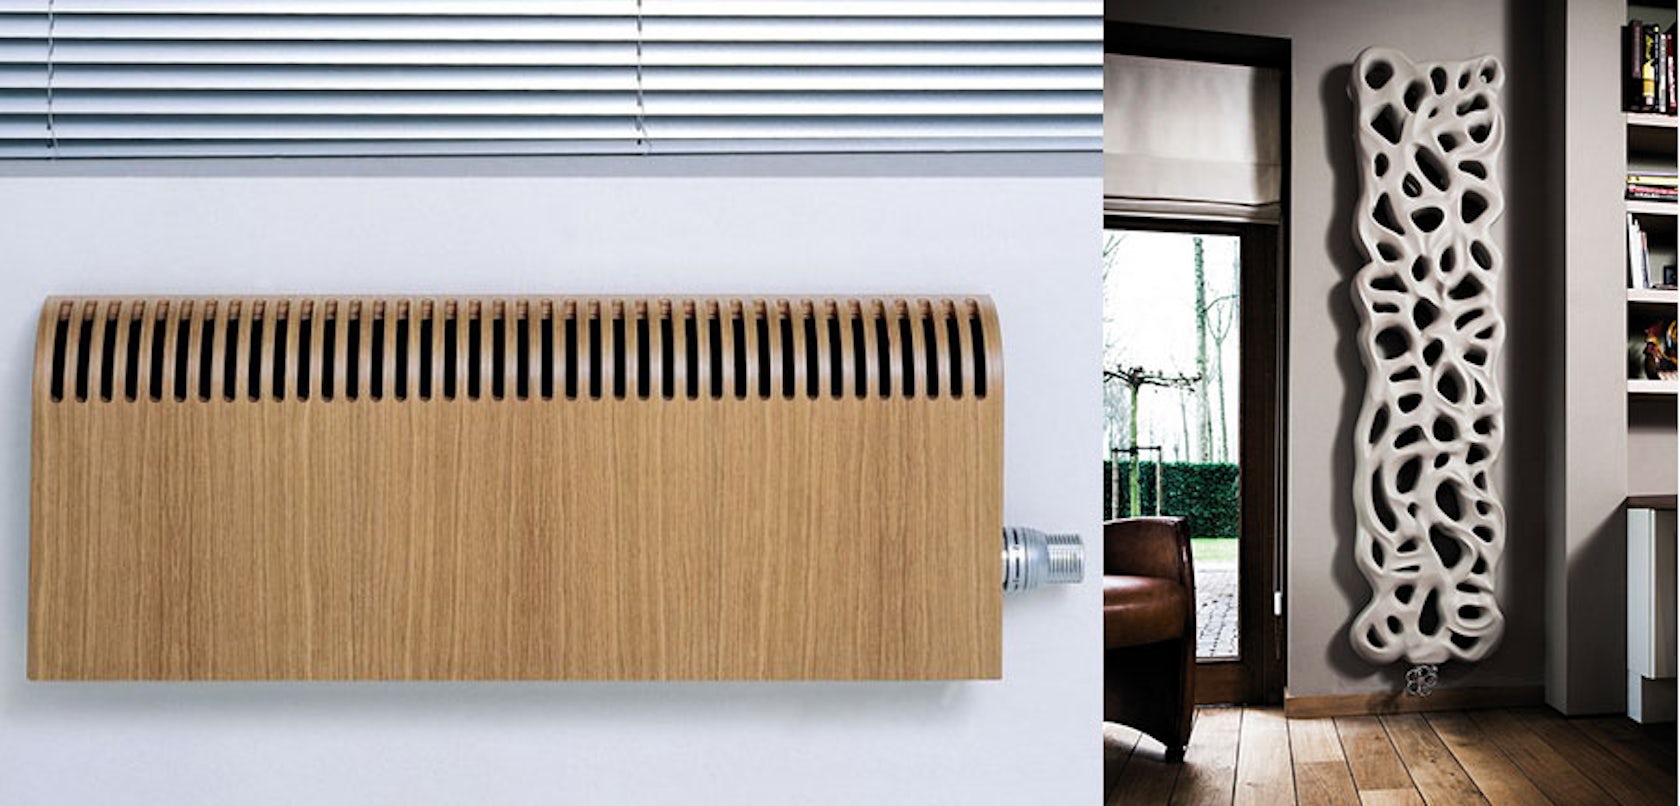 16 Radiators that Look Works of Art Architizer Journal